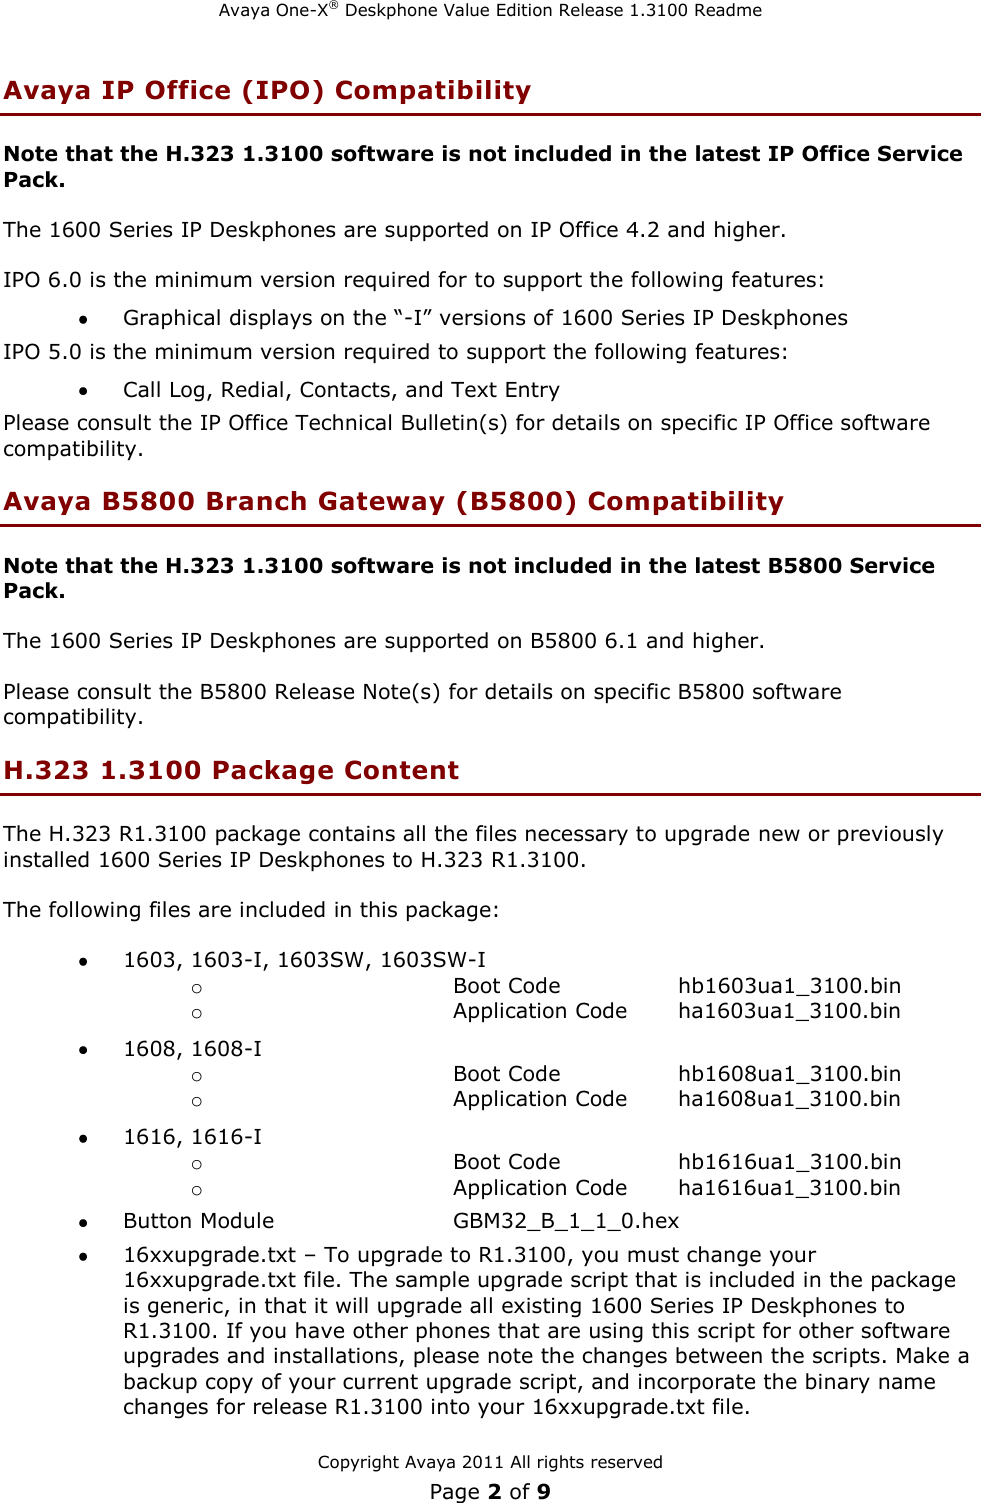 Page 2 of 9 - Avaya Avaya-1600-Series-H323-3-Service-Pack-1-Users-Manual- H.323 Release 1.3100 Readme  Avaya-1600-series-h323-3-service-pack-1-users-manual